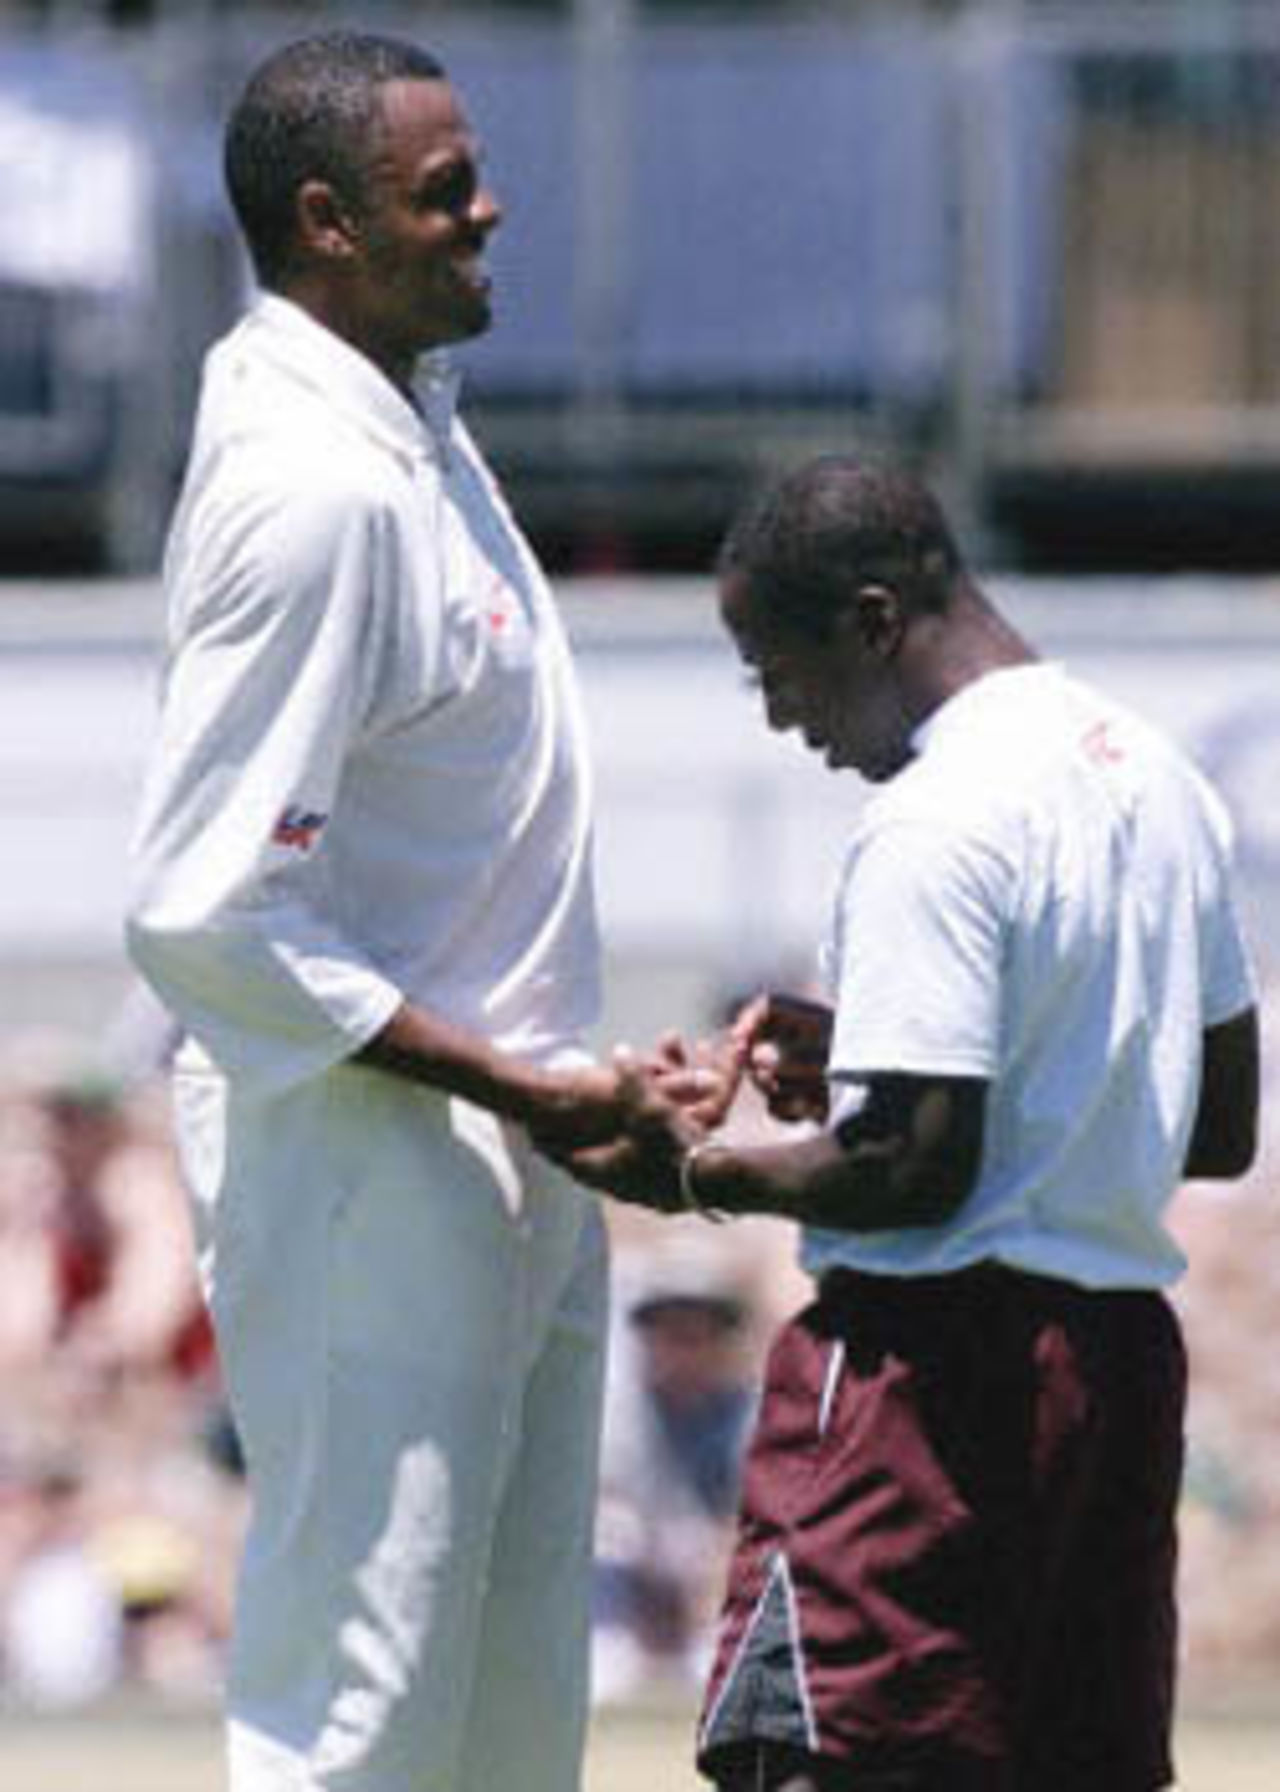 Walsh feels the pain as team trainer checks his hand, The Frank Worrell Trophy, 2000/01, 2nd Test, Australia v West Indies, W.A.C.A. Ground, Perth, 01-05 December 2000 (Day 2).